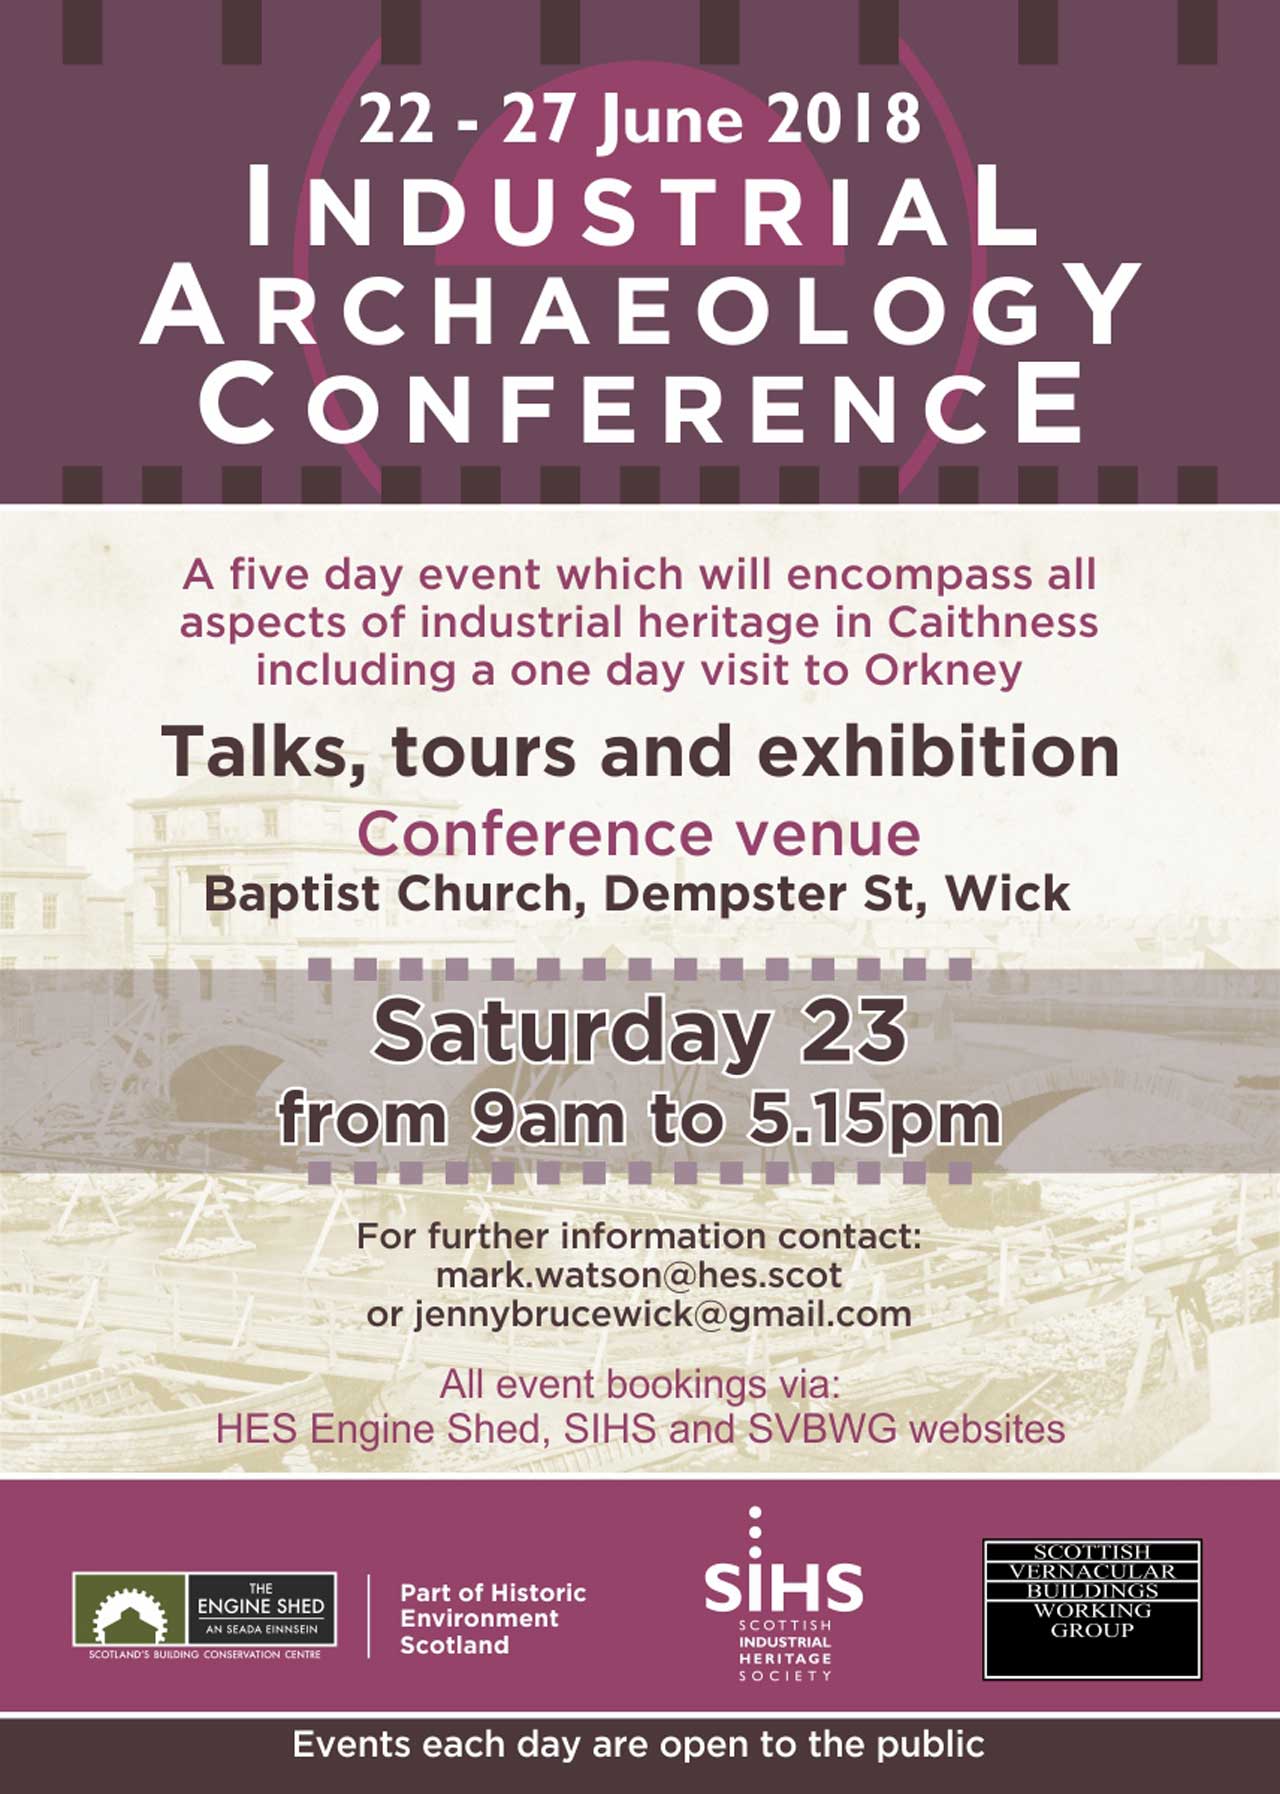 Photo: Industrial Archaeology Conference 2018